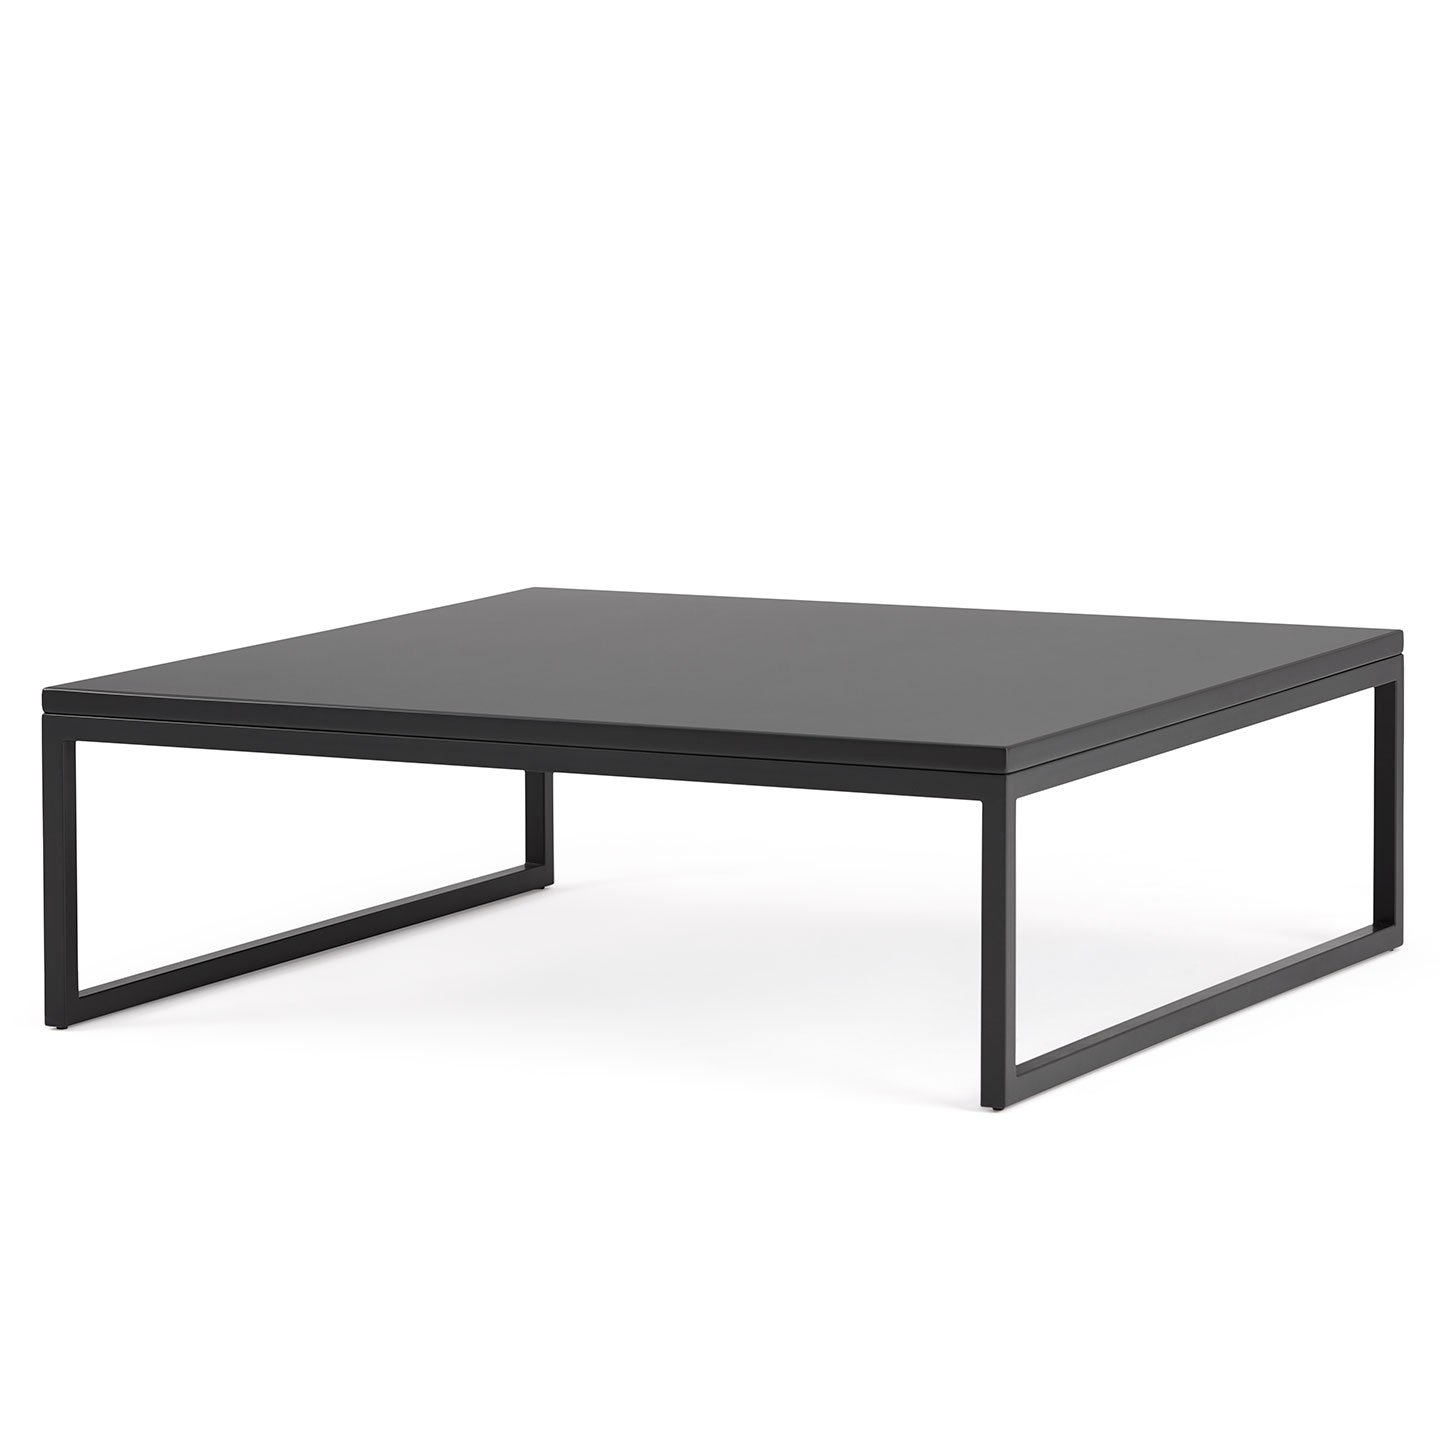 Haworth Fronzoni 64 table with 2 legs in matte top finish